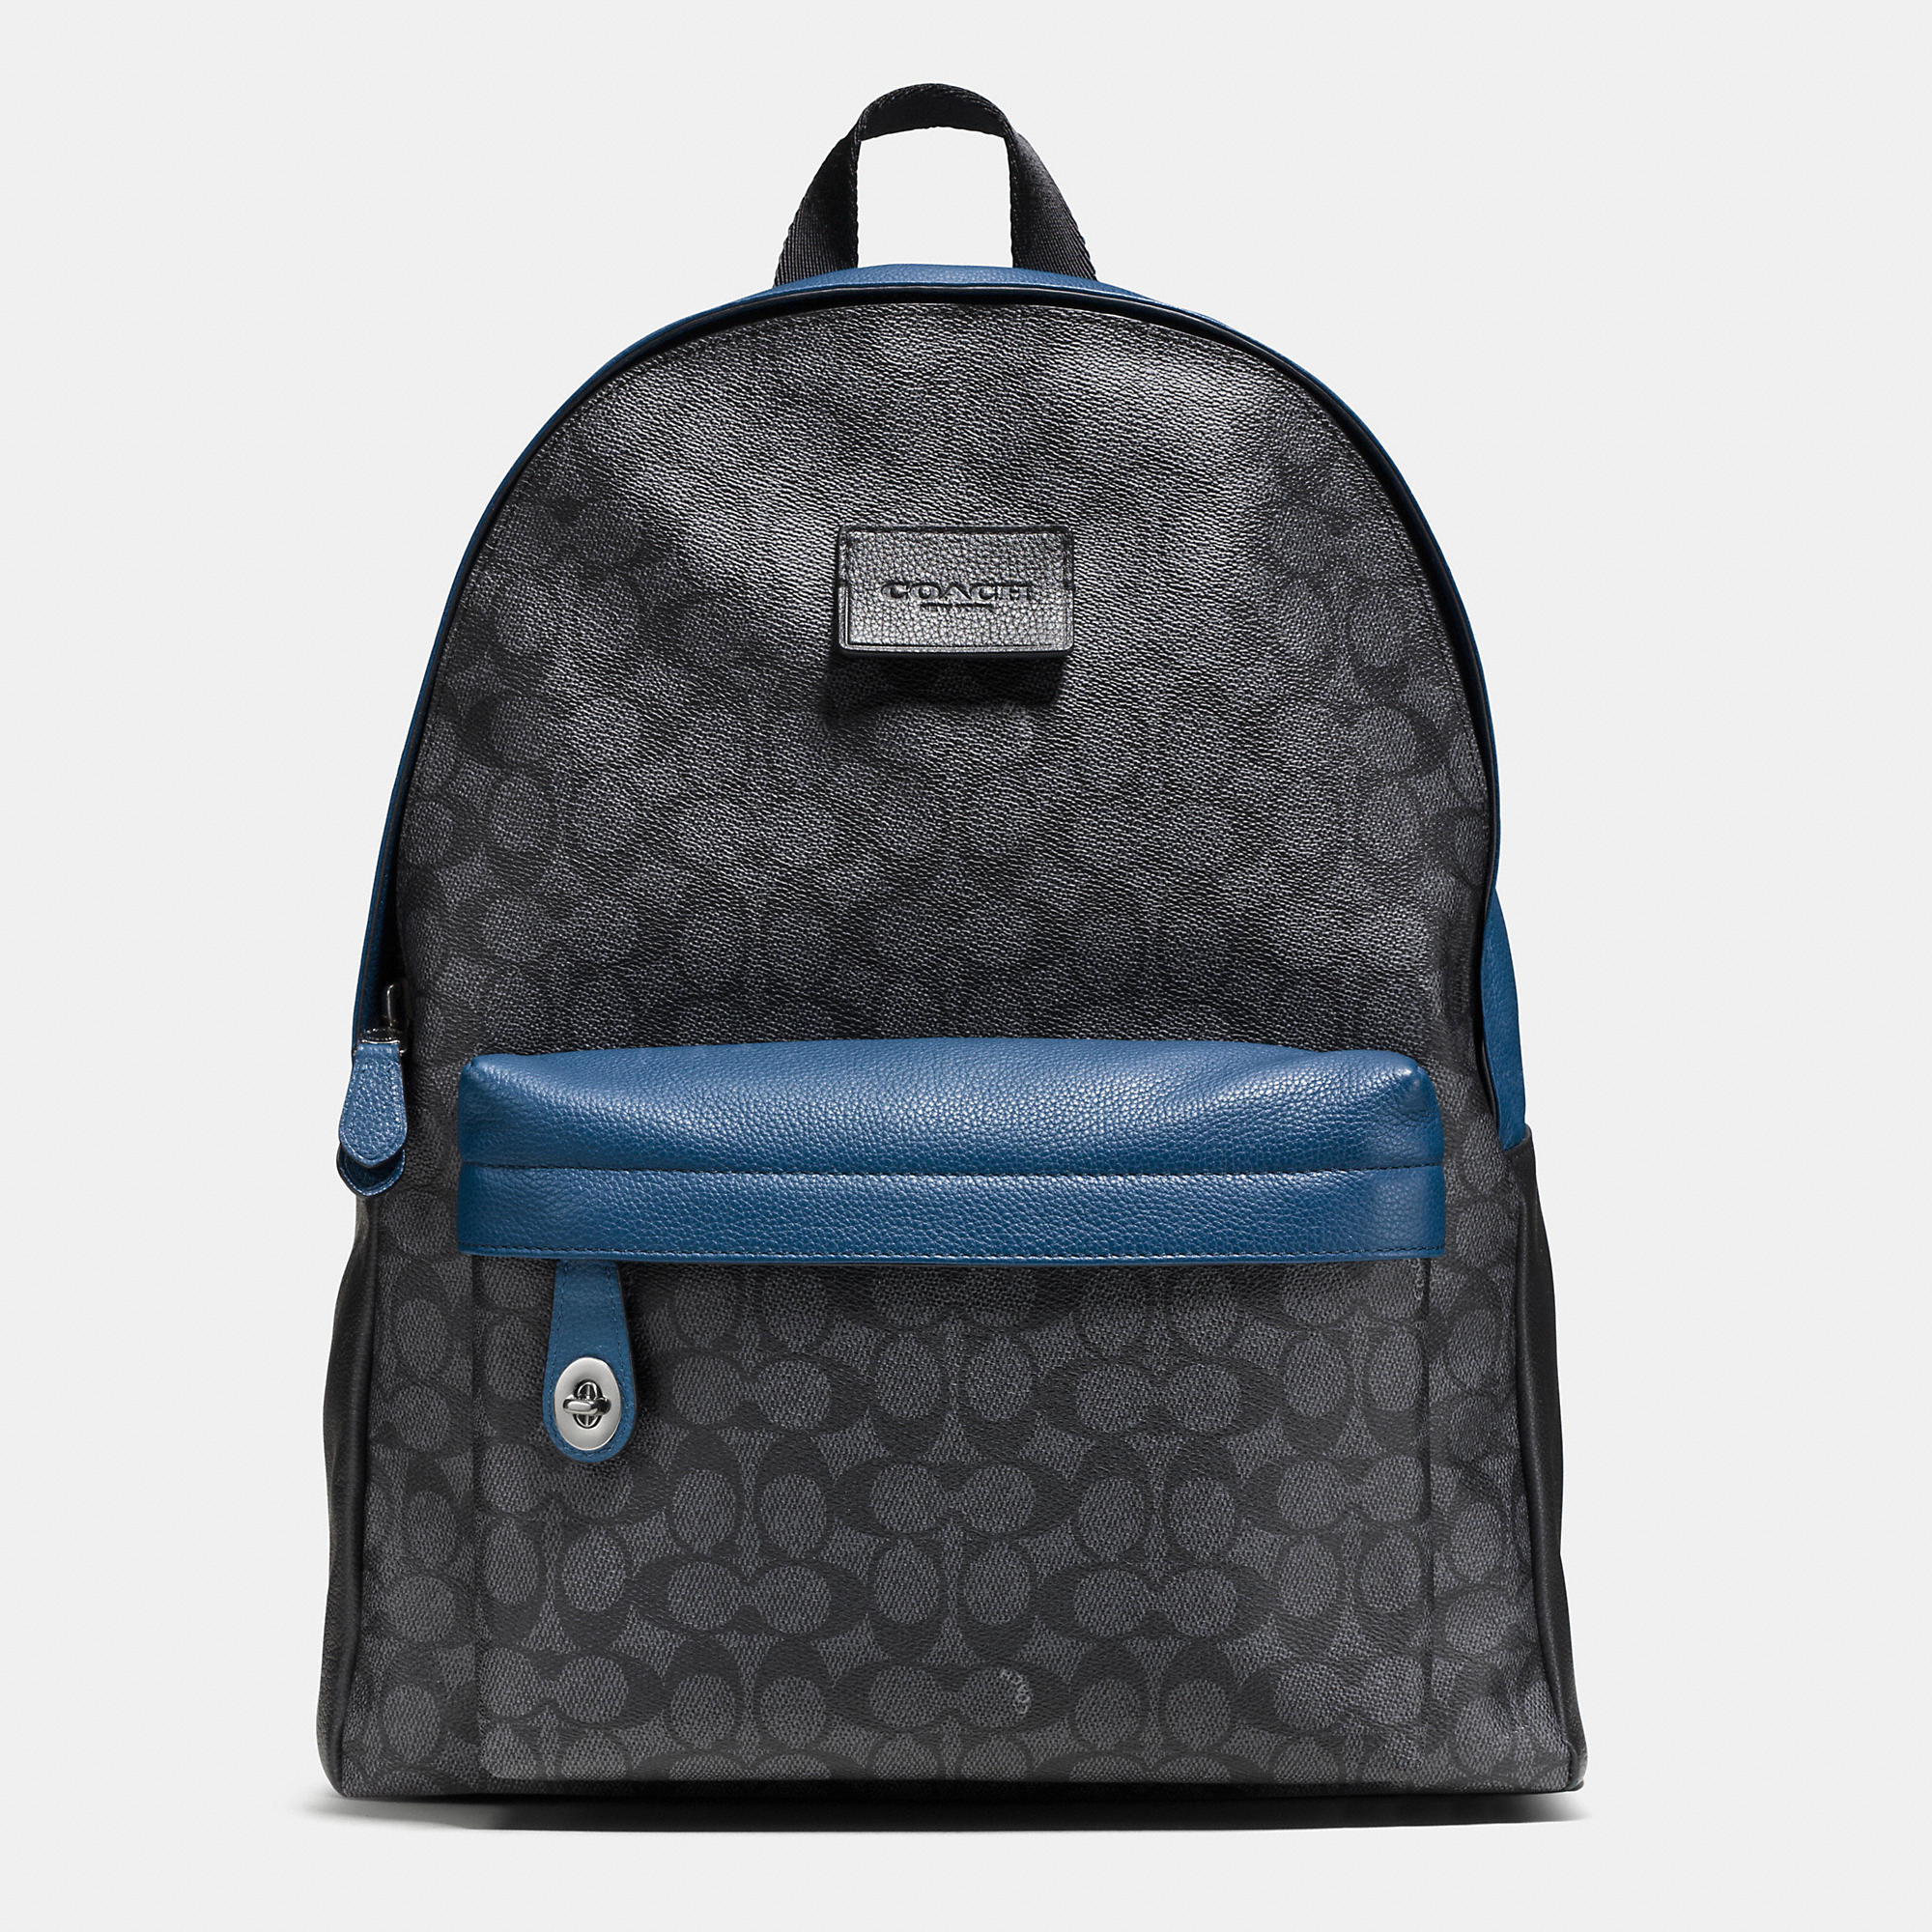 Coach Campus Backpack In Signature Coated Canvas in Black for Men | Lyst